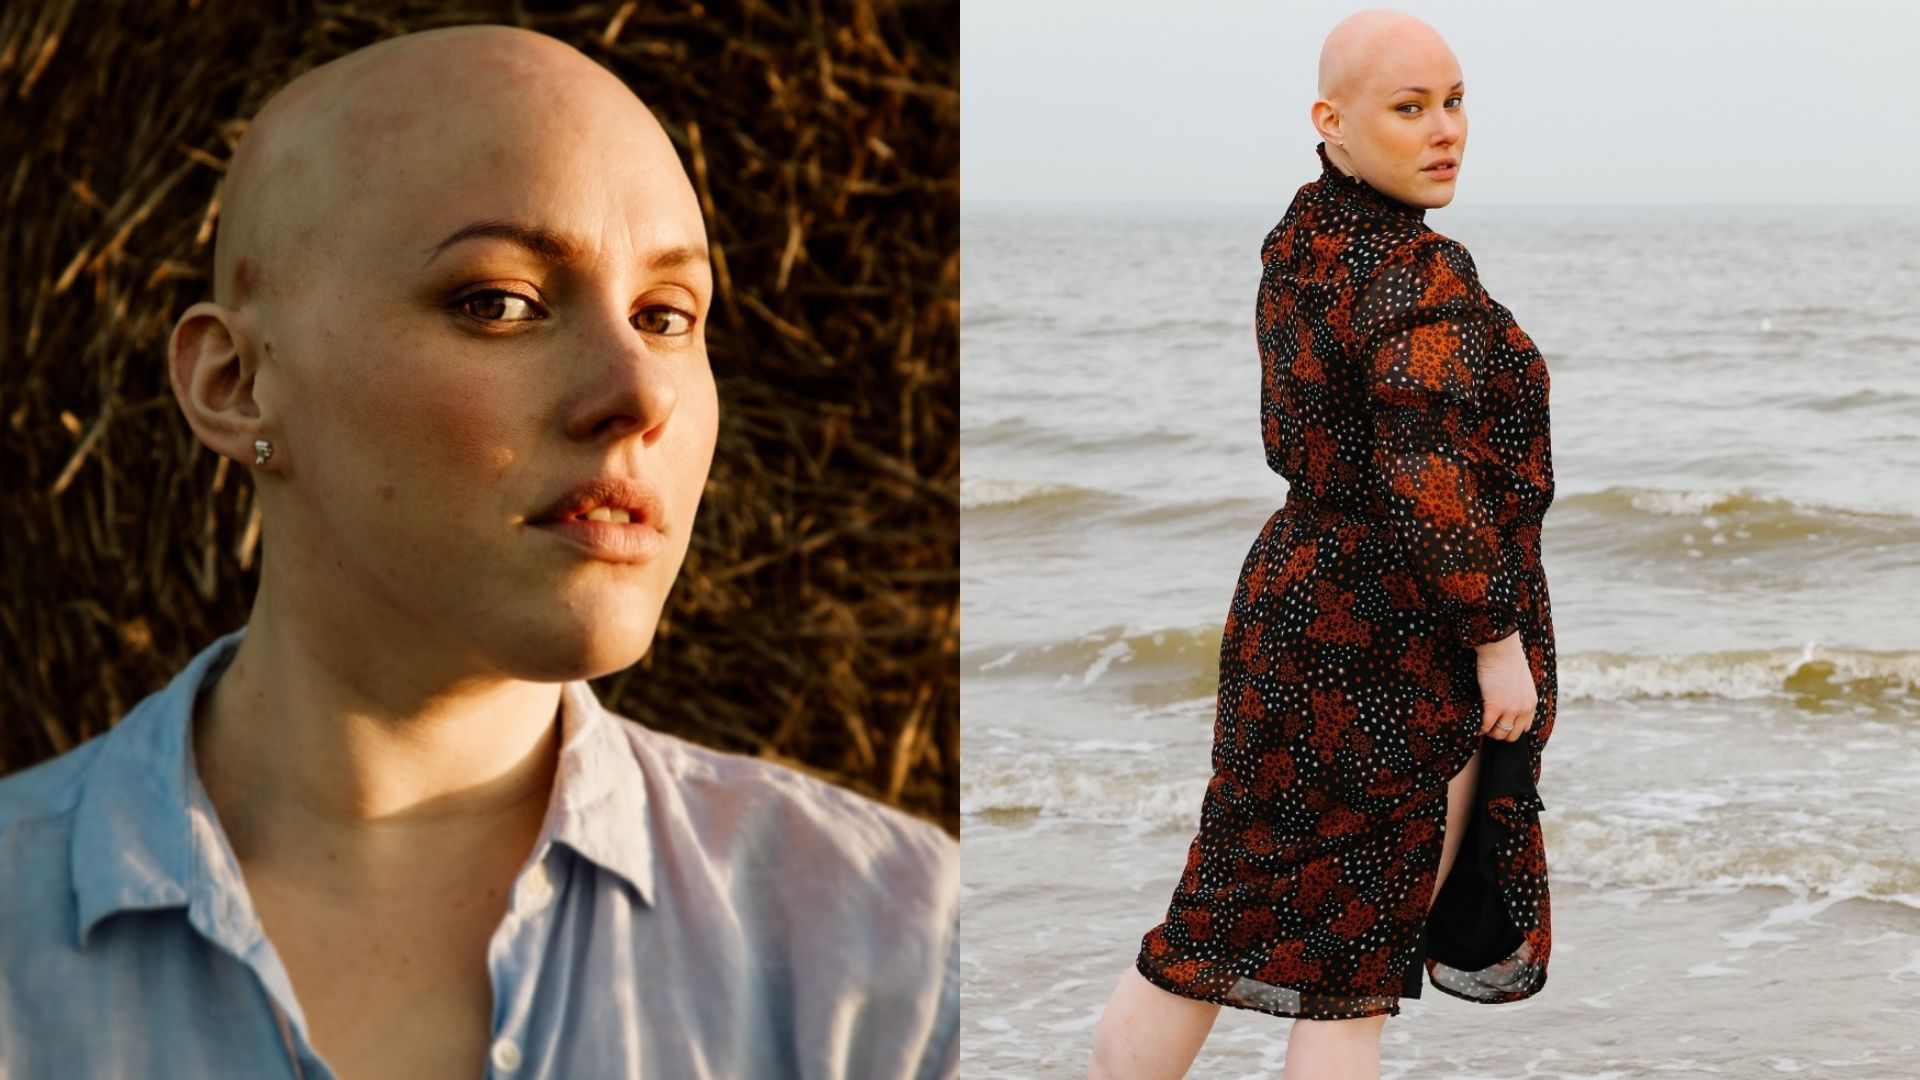 Left: a close up of Laura, a woman in her 20s/30s with alopecia and green eyes. She's wearing a light blue blouse and standing in front of a hay bale. Right: a medium shot of Laura standing at the edge of the sea and looking back towards the camera over her shoulder. She's wearing a black and red floral print dress.